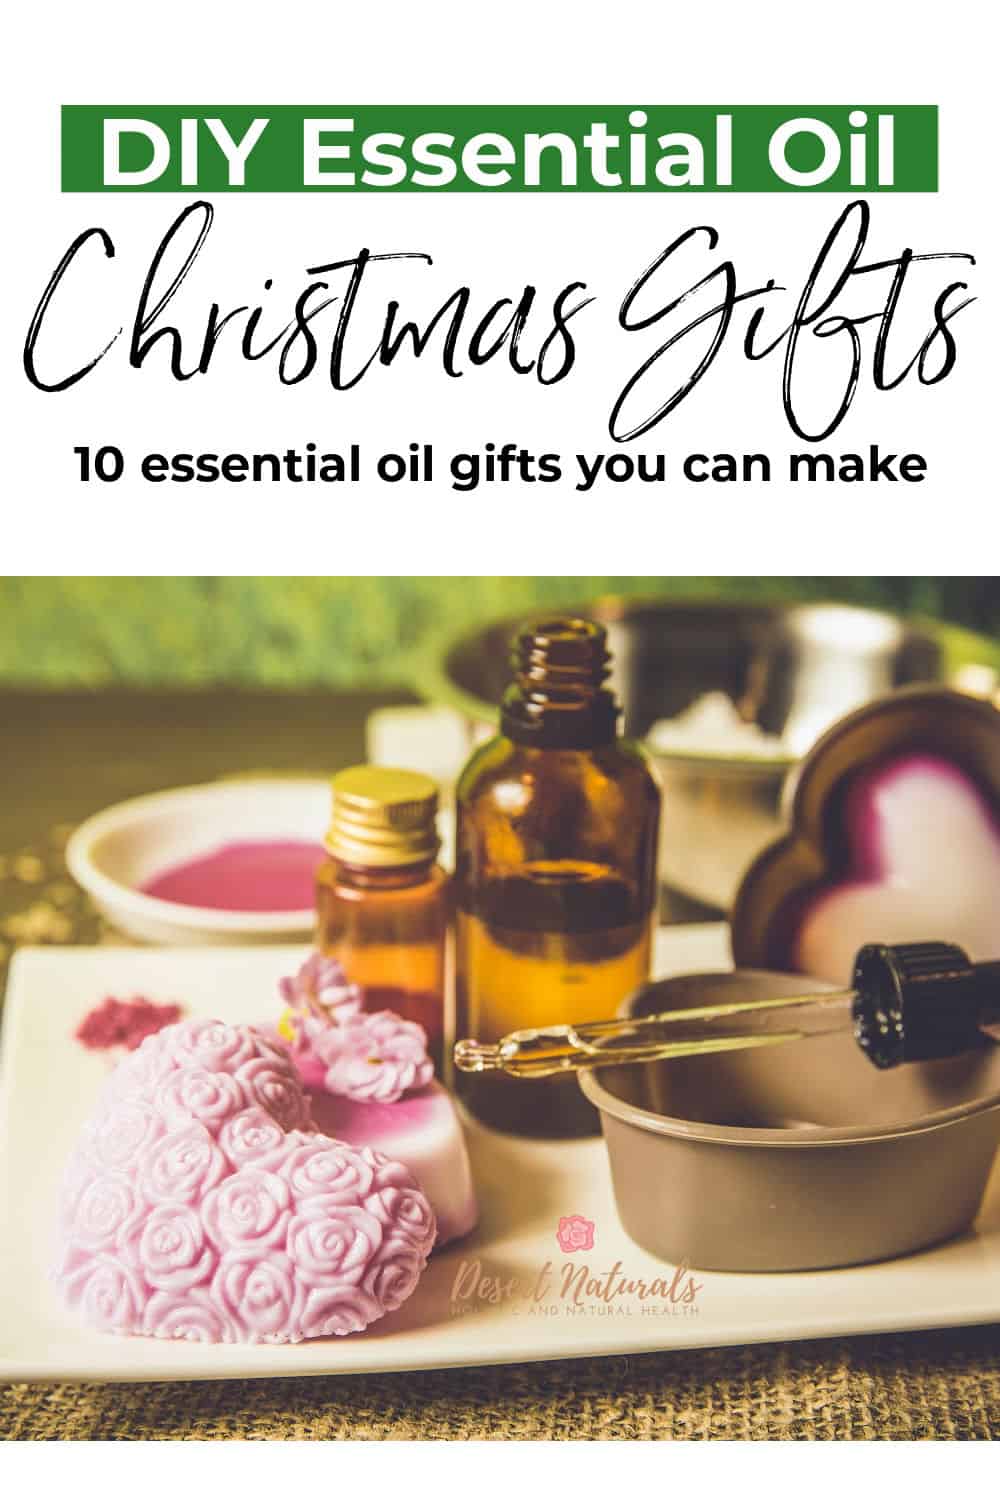 image of homemade essential oil diy gifts like soap